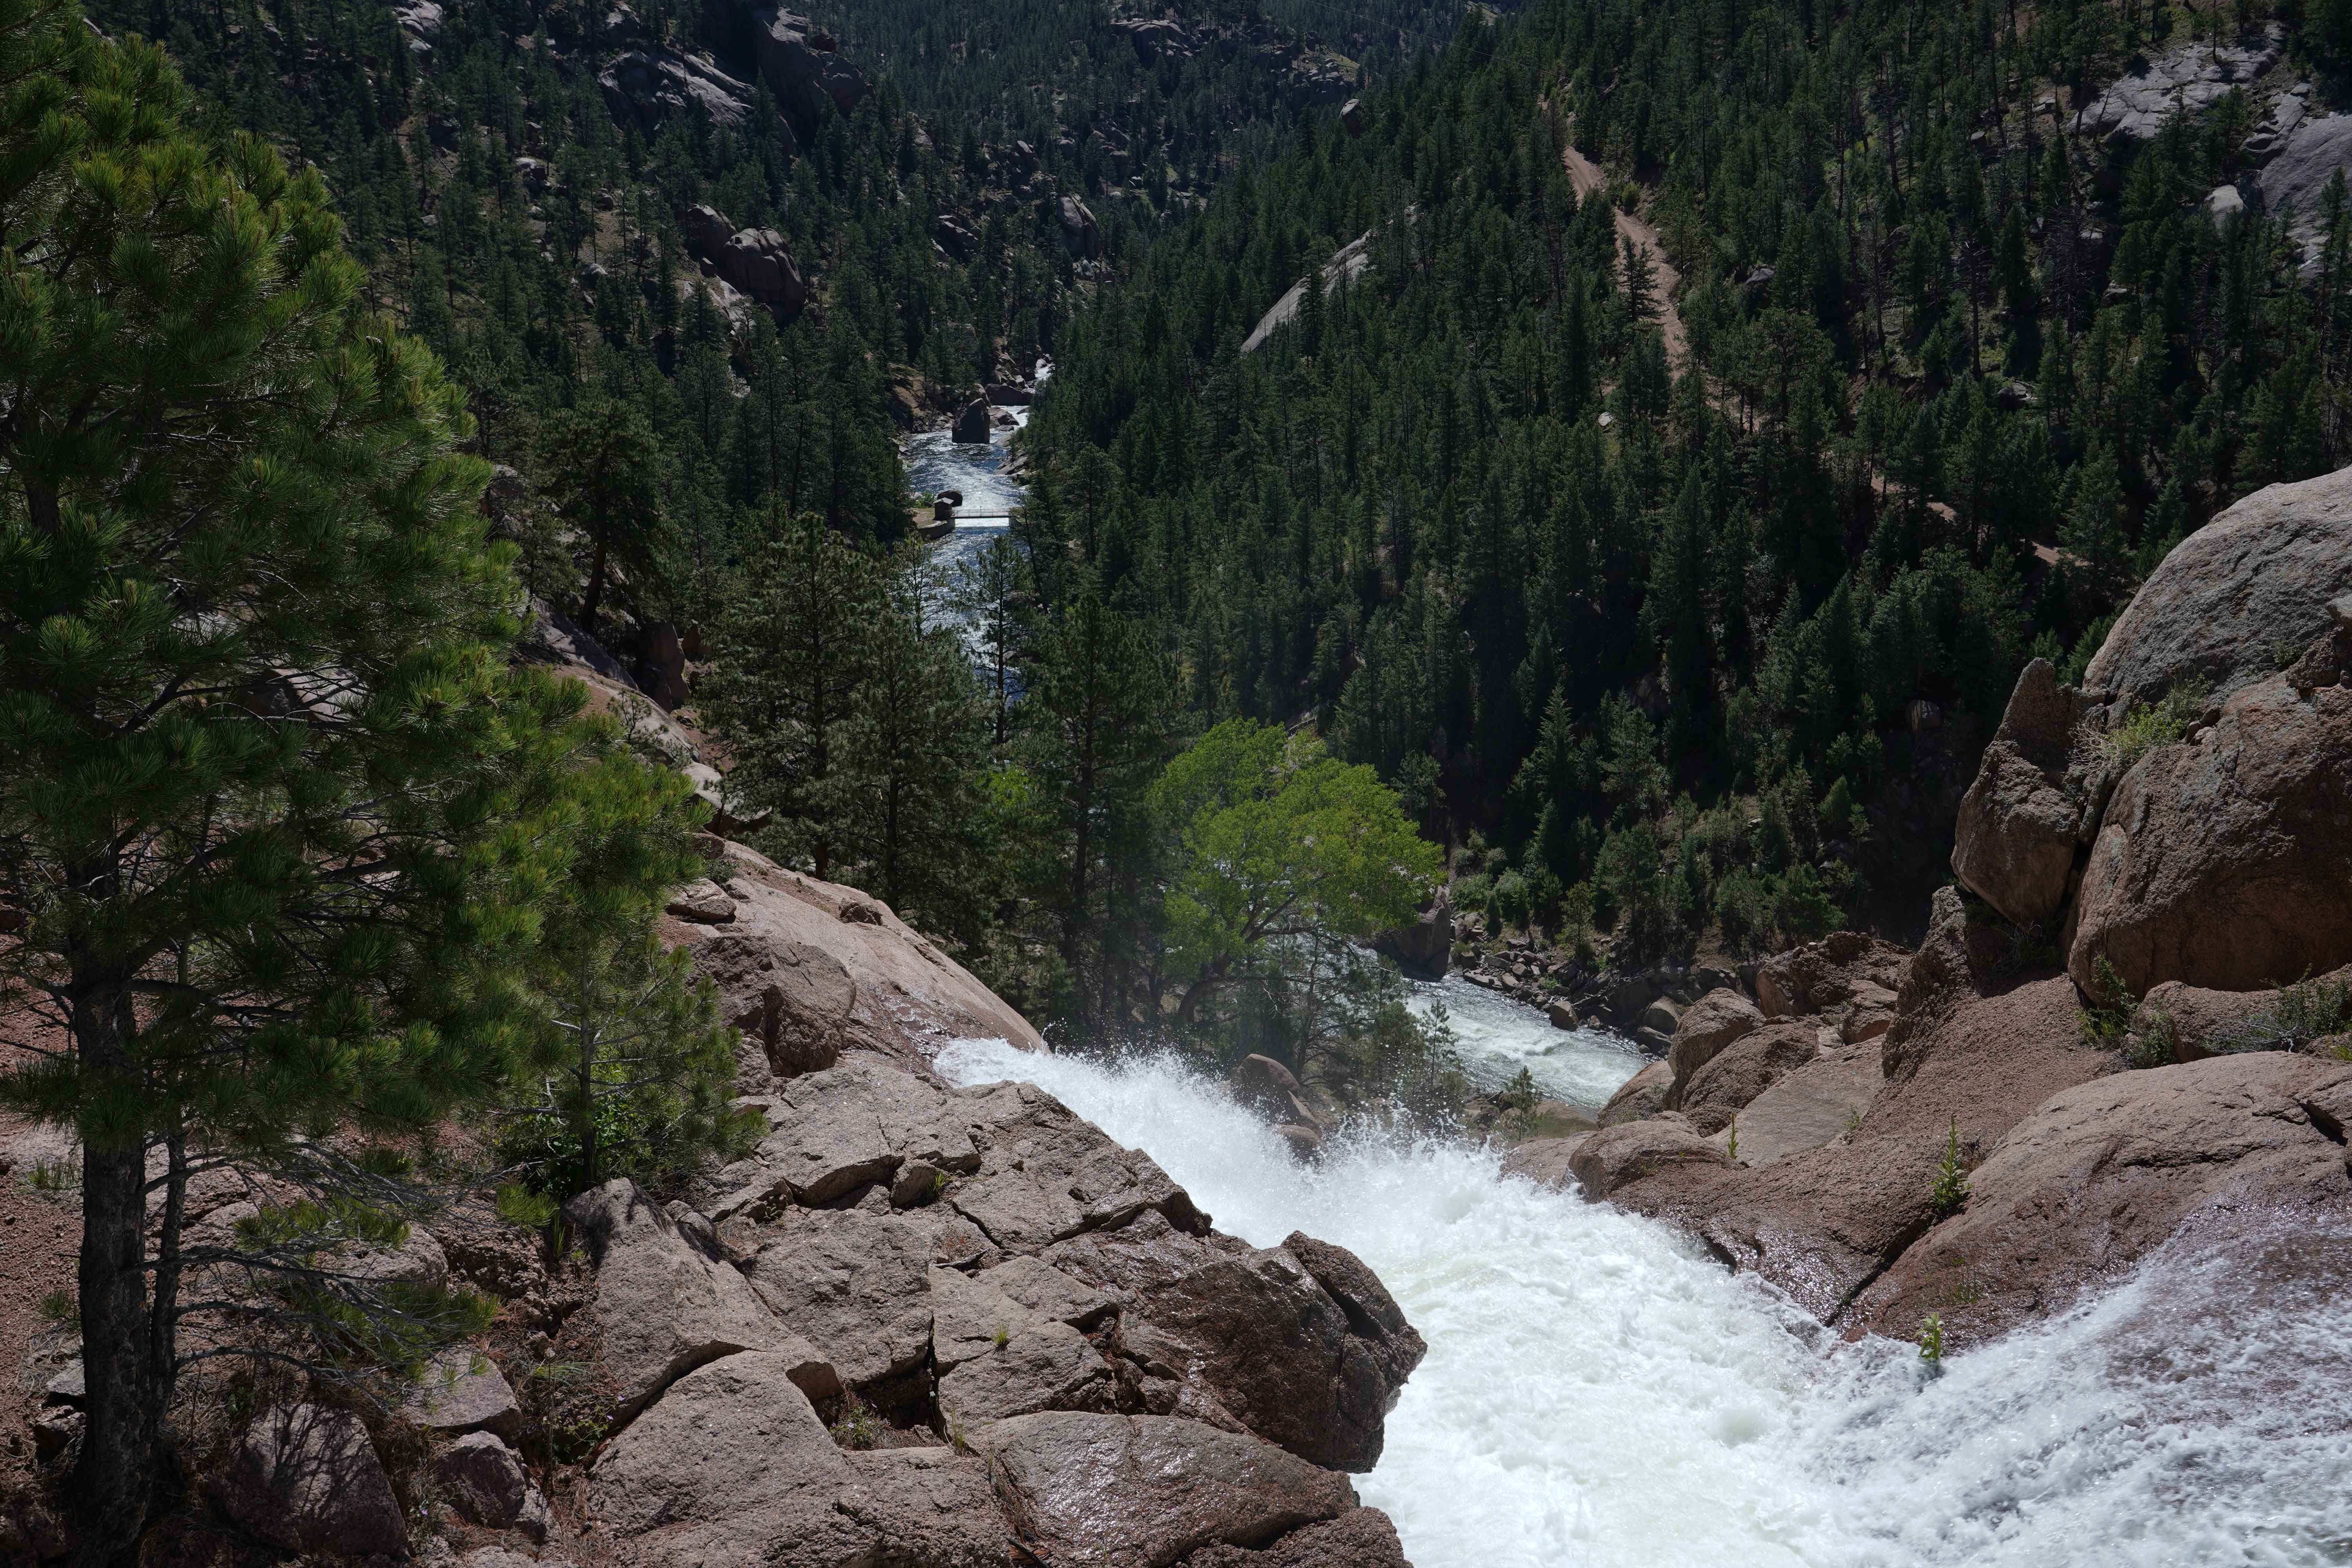 White water, green trees and red boulders.